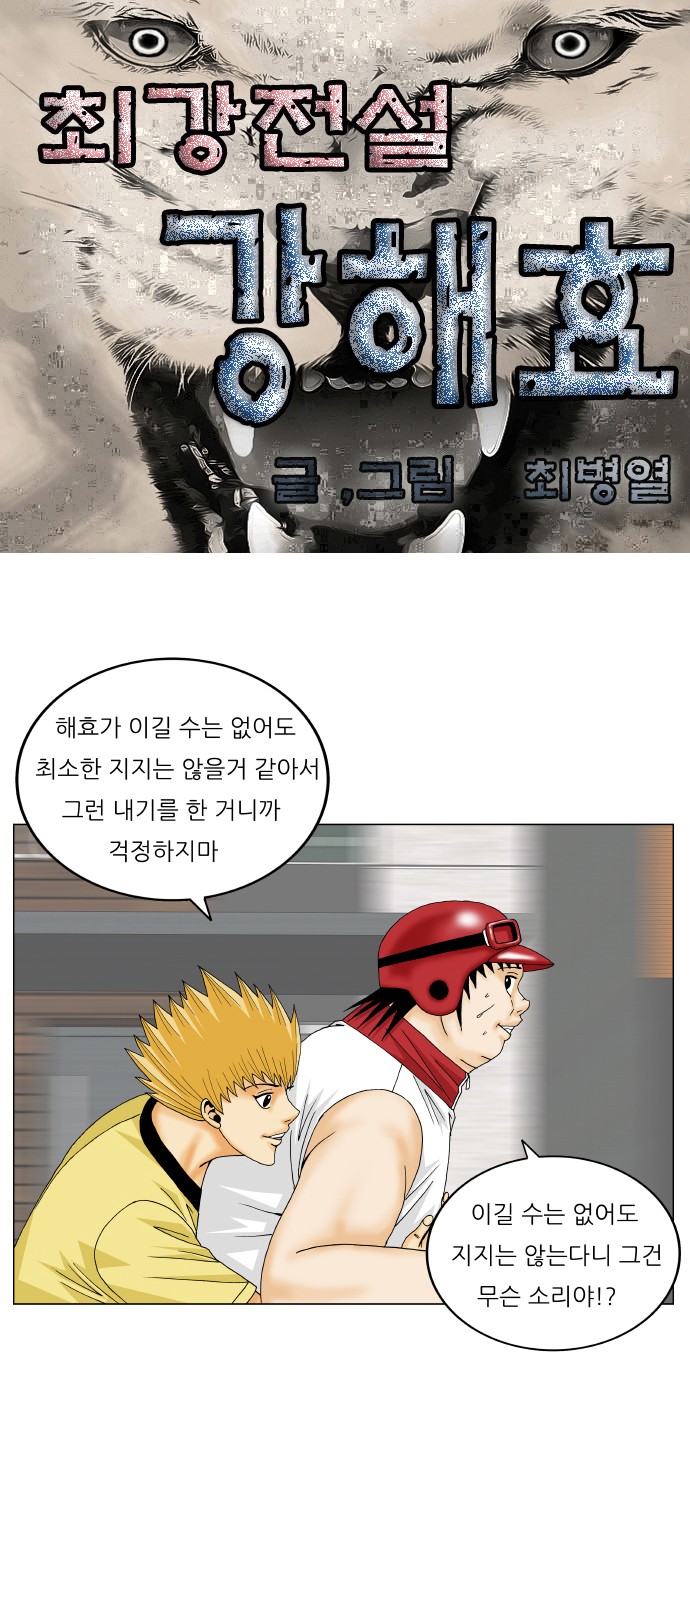 Ultimate Legend - Kang Hae Hyo - Chapter 277 - Page 1